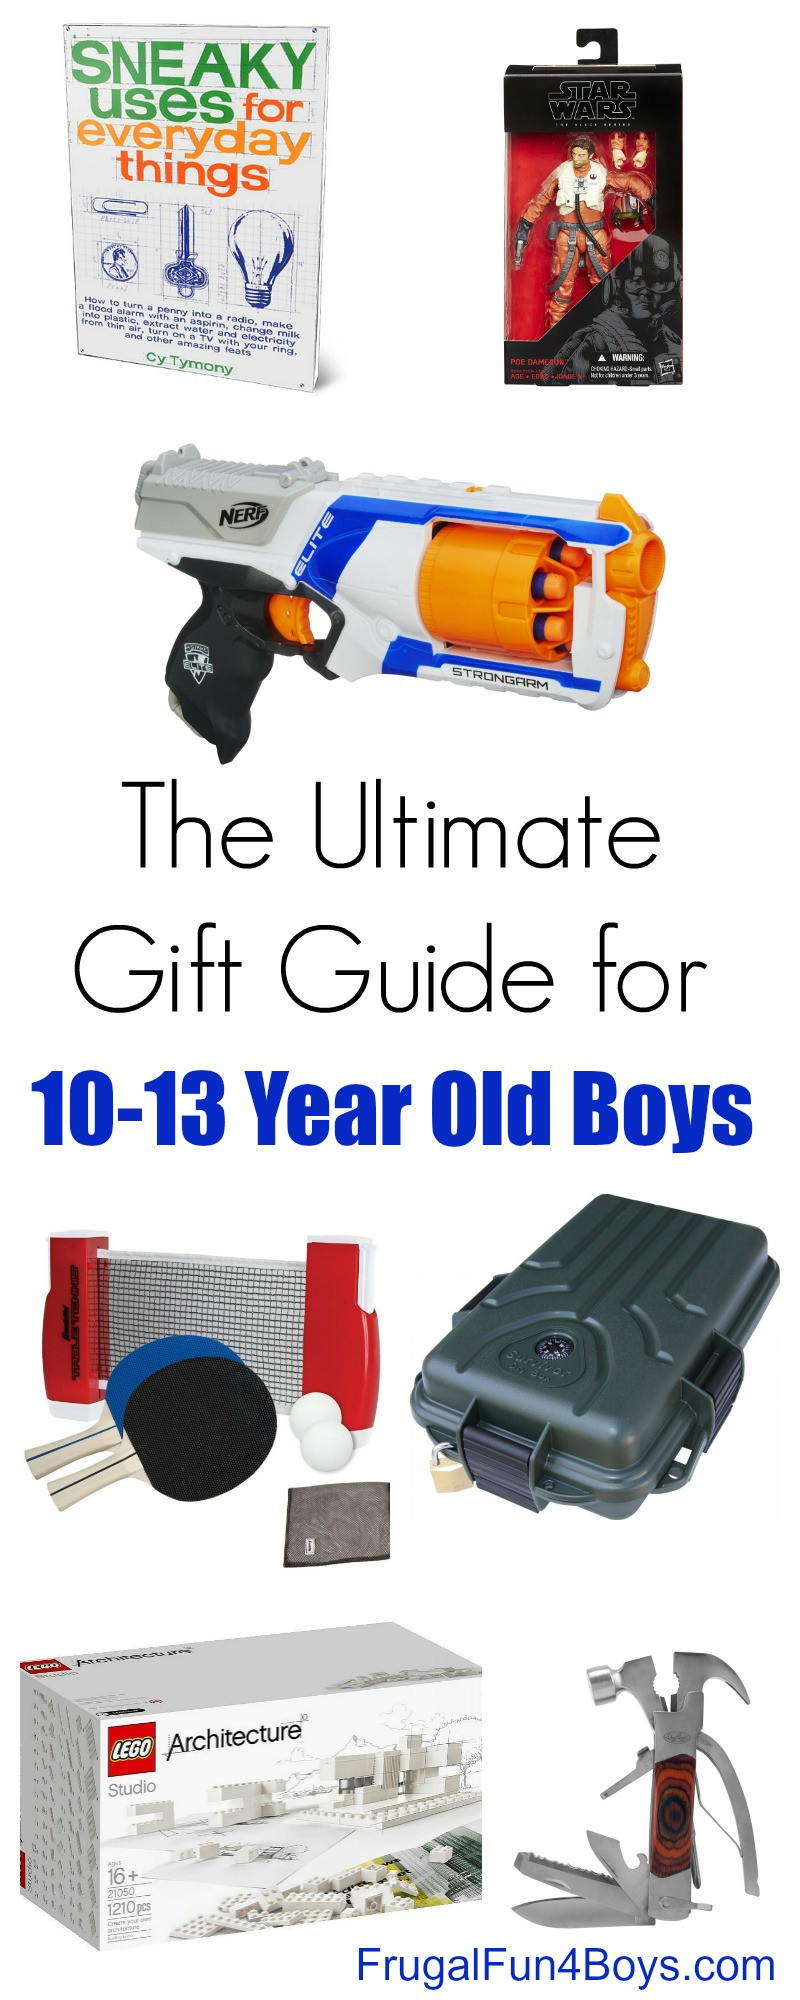 13 Year Old Boy Birthday Gift Ideas
 Gift Ideas for 10 to 13 Year Old Boys Frugal Fun For